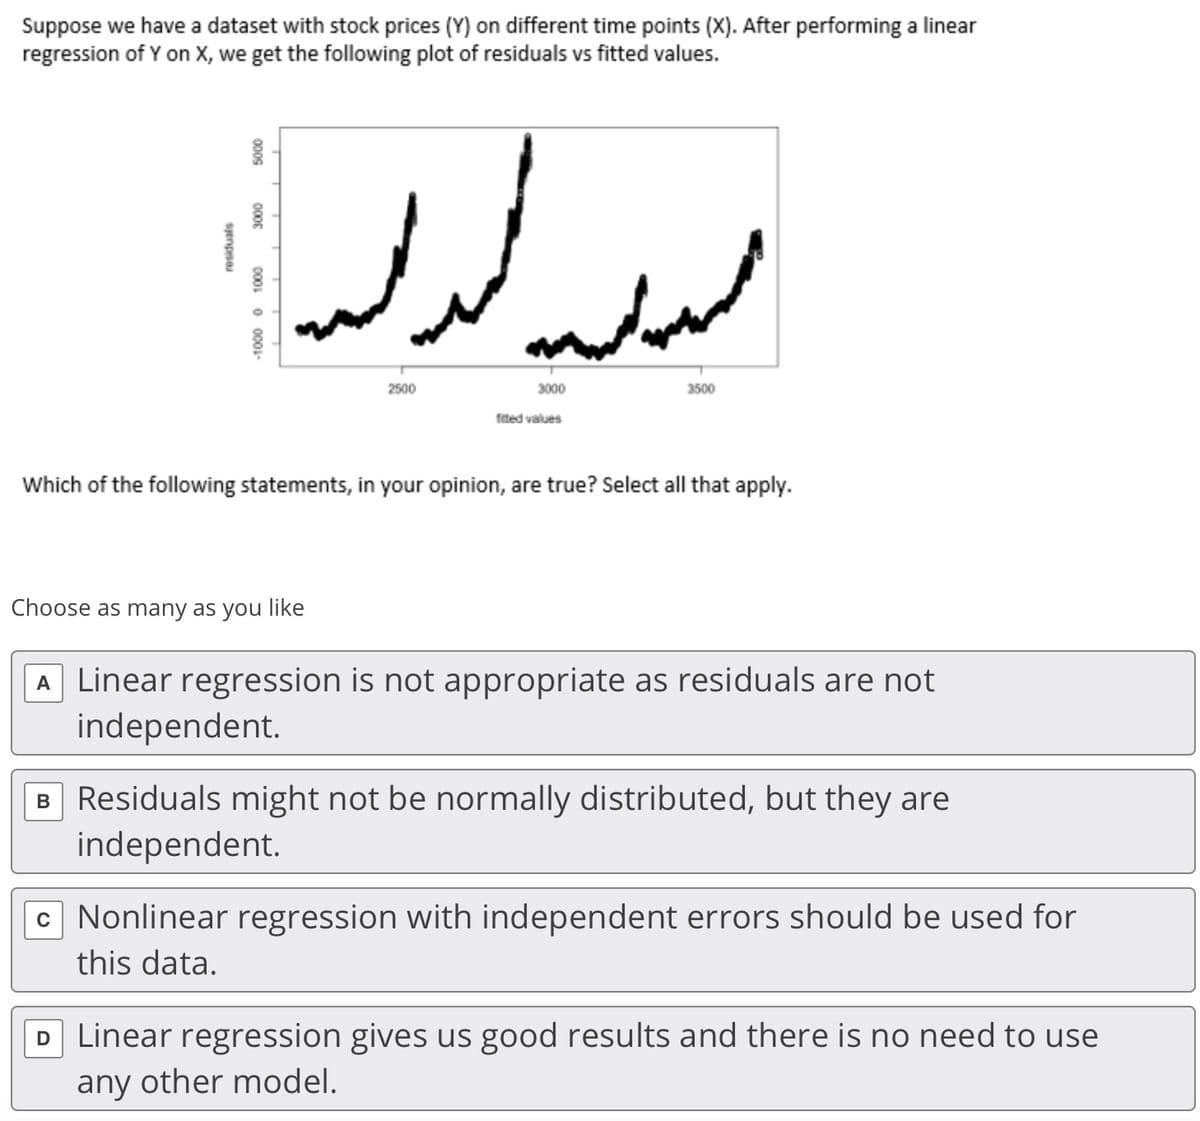 Suppose we have a dataset with stock prices (Y) on different time points (X). After performing a linear
regression of Y on X, we get the following plot of residuals vs fitted values.
2500
3000
3500
fited values
Which of the following statements, in your opinion, are true? Select all that apply.
Choose as many as you like
A Linear regression is not appropriate as residuals are not
independent.
B Residuals might not be normally distributed, but they are
independent.
c Nonlinear regression with independent errors should be used for
this data.
D Linear regression gives us good results and there is no need to use
any other model.
000G
0000
-1000 0 1000
sjenpsa
